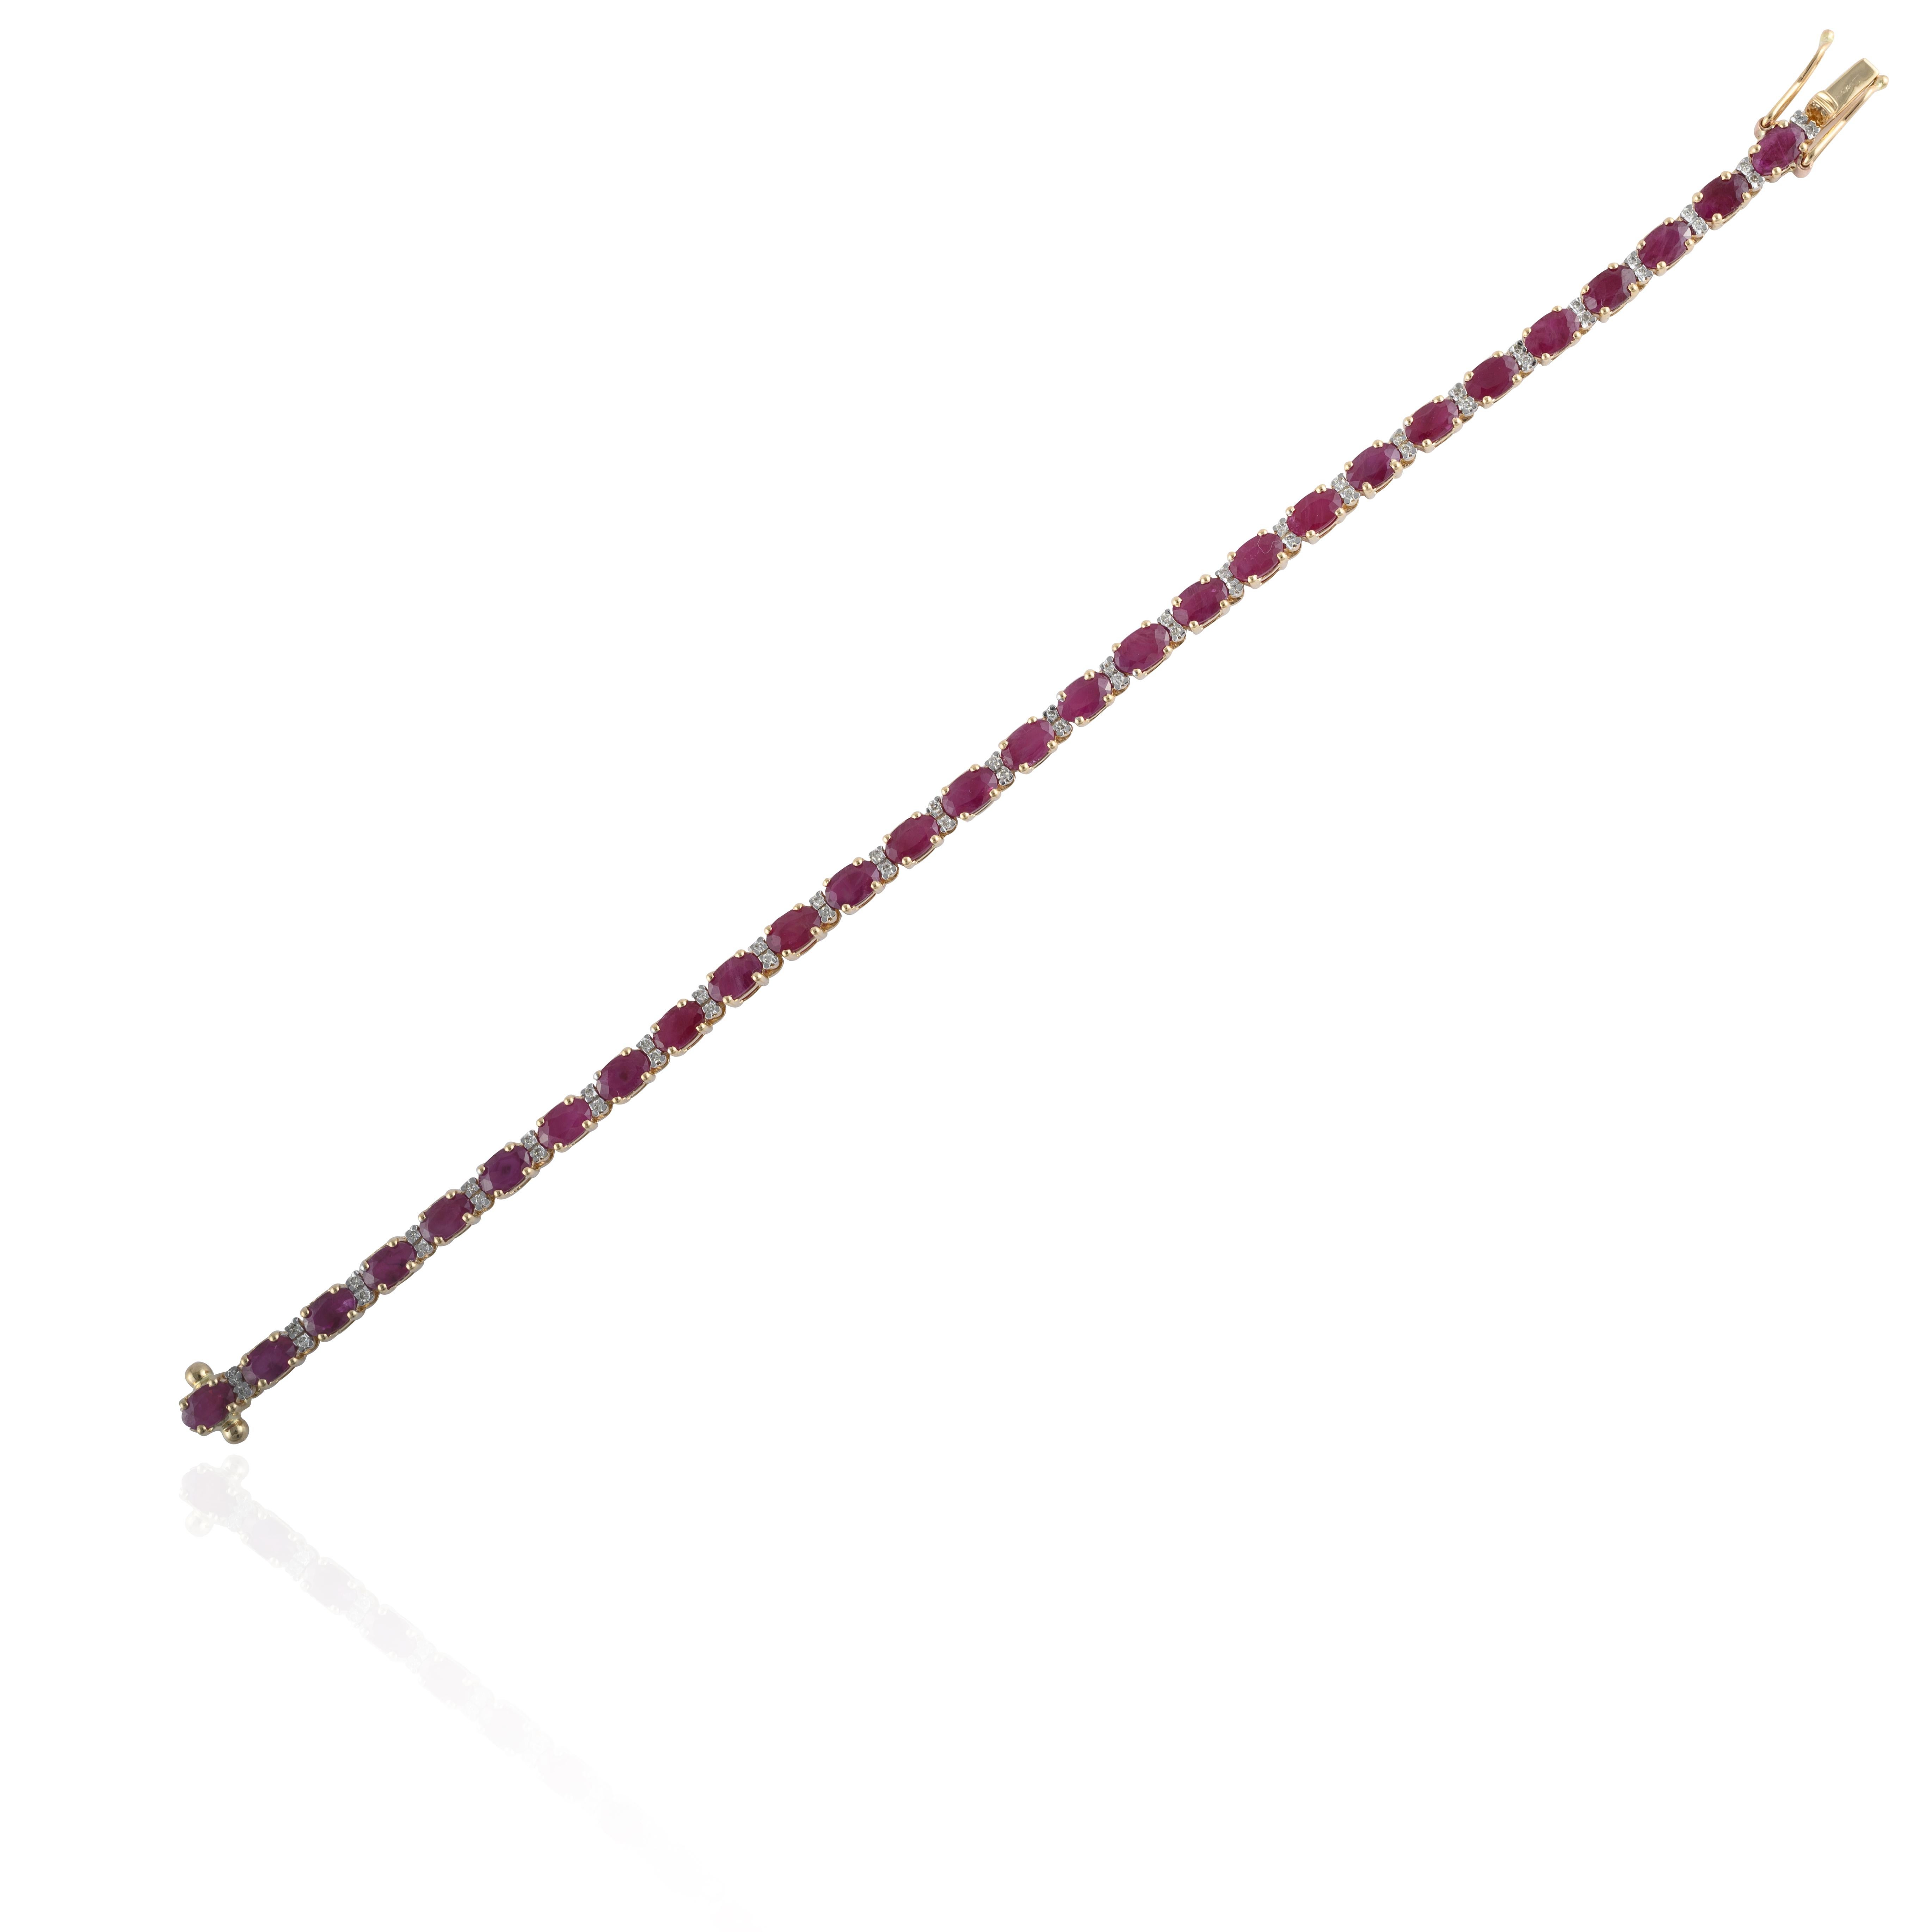 9.36 Carat Genuine Ruby Diamond Tennis Bracelet in 14K Solid Yellow Gold In New Condition For Sale In Houston, TX